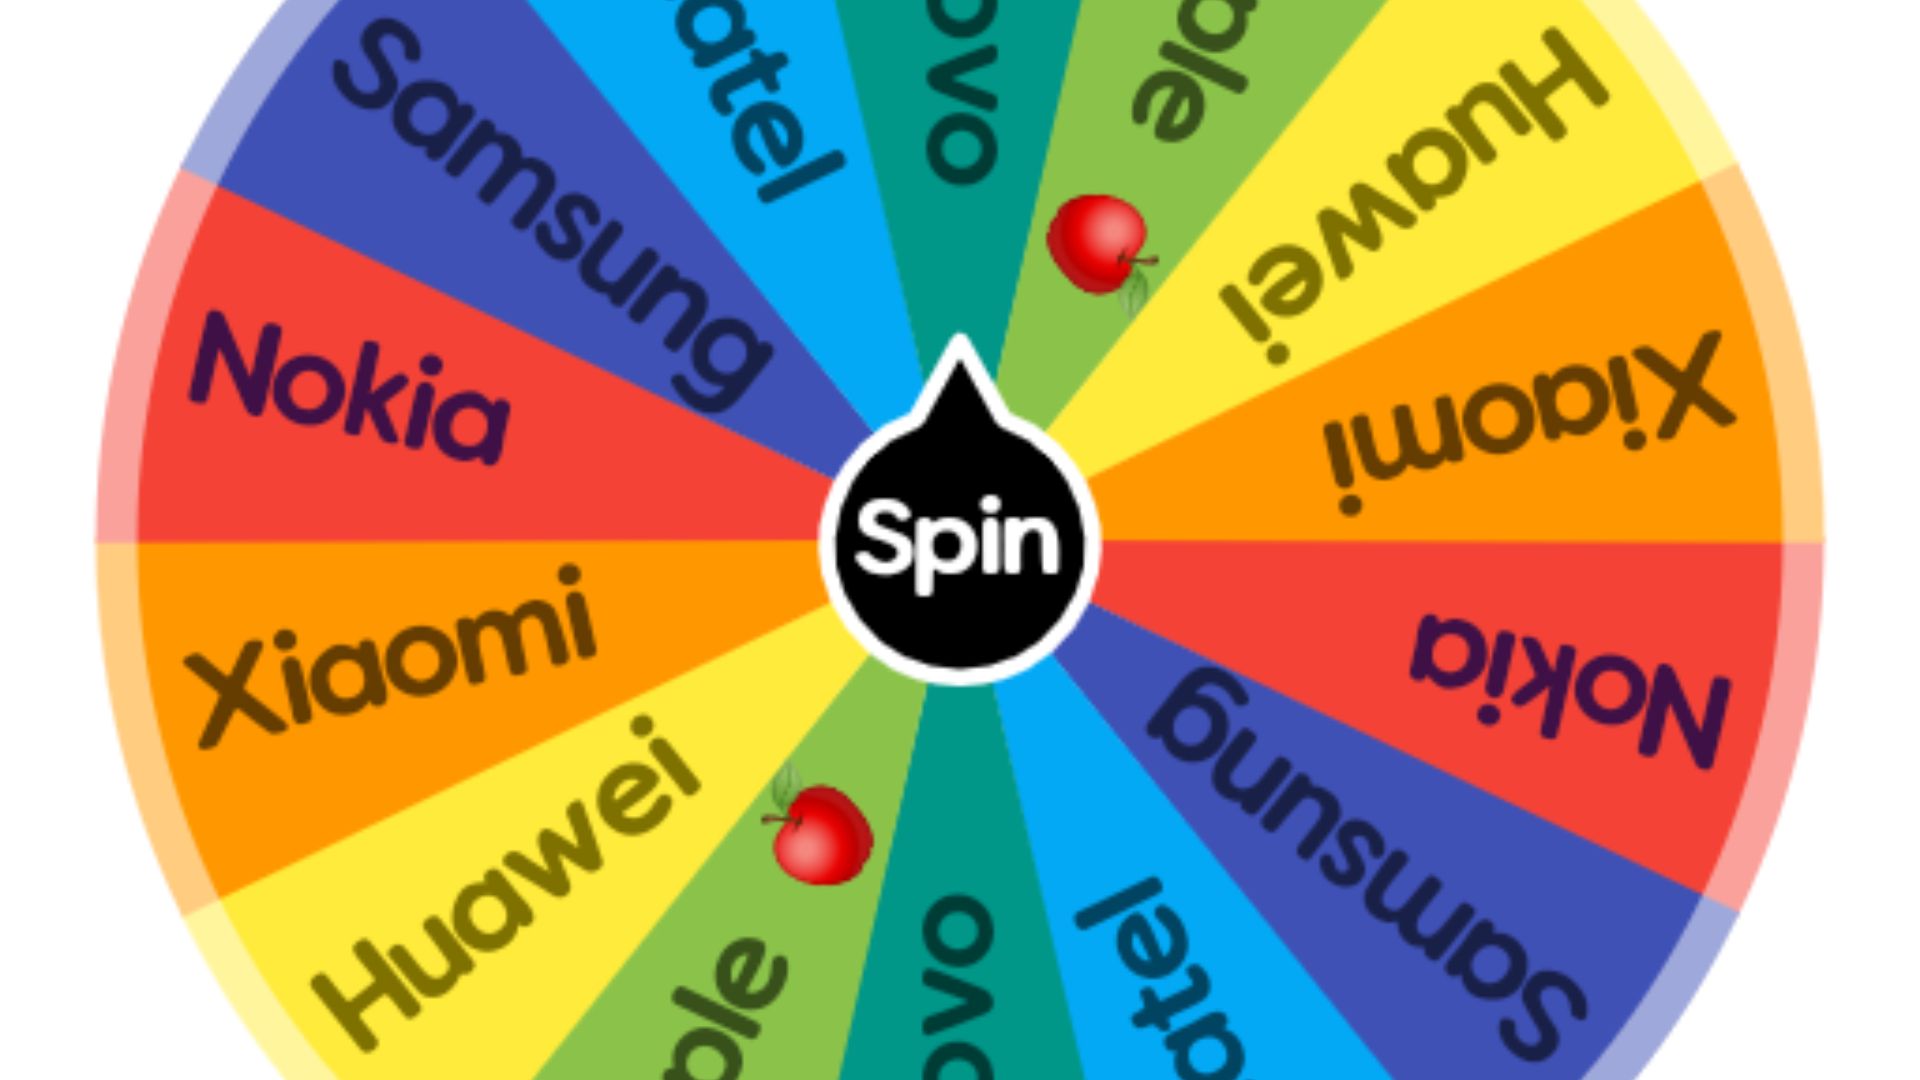 A Spin Wheel for Mobile Devices